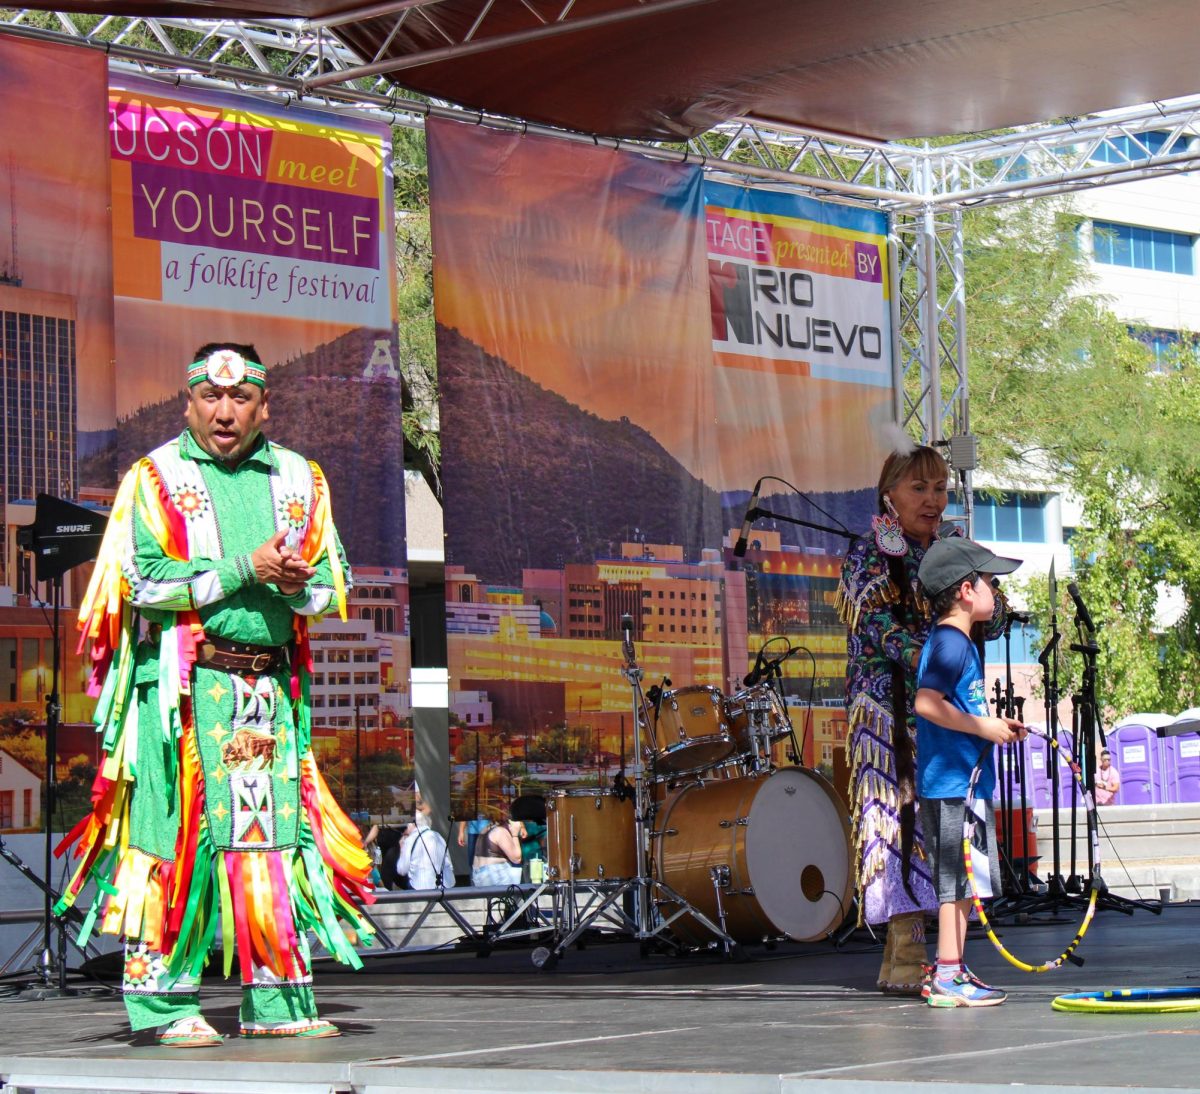 Members of the Yellow Bird Indian Dancers congratulate a young volunteer after teaching him a traditional dance on Saturday, Oct. 14, at the Tucson Meet Yourself festival in Downtown Tucson. This internationally renowned dance company shares songs, stories and dances from Apache culture.
